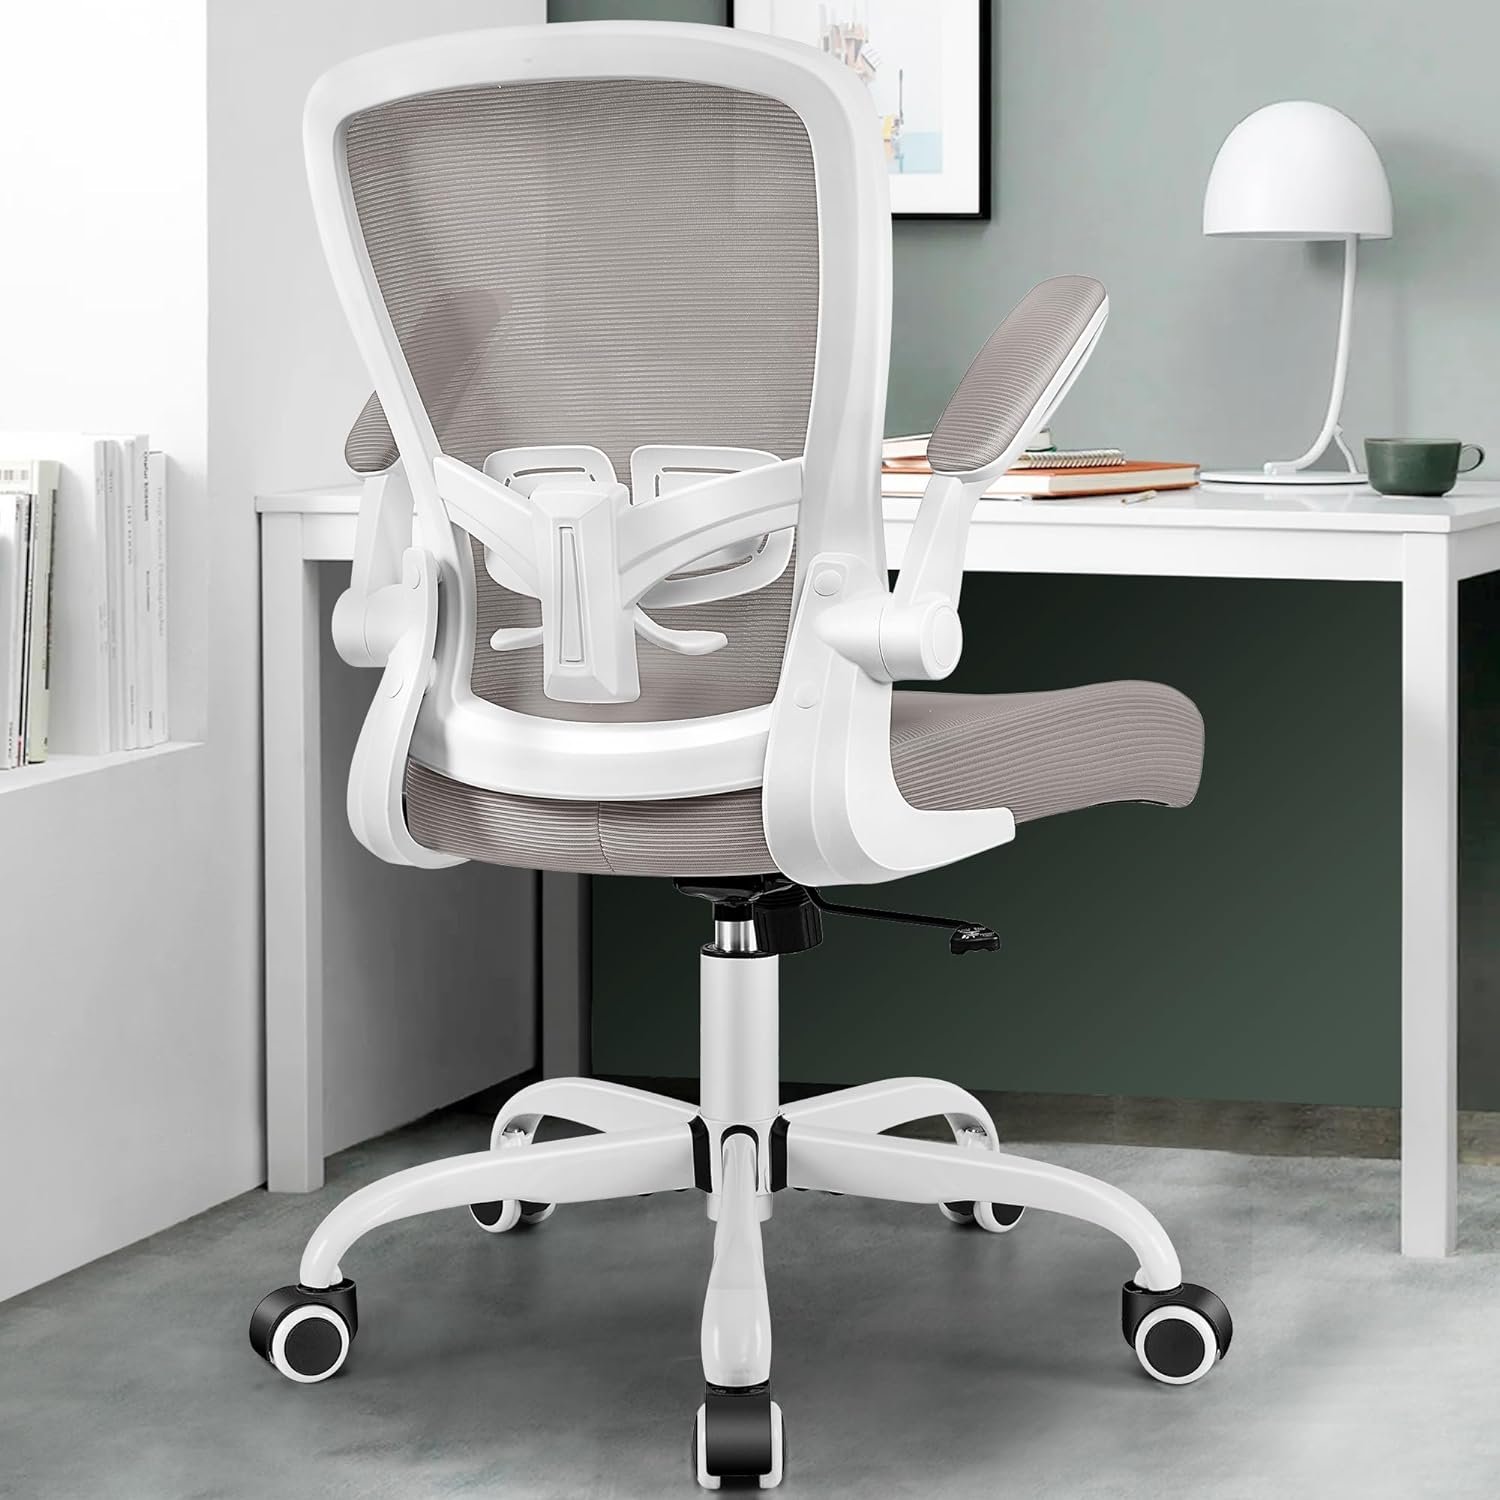 MINLOVE Office Chair Review